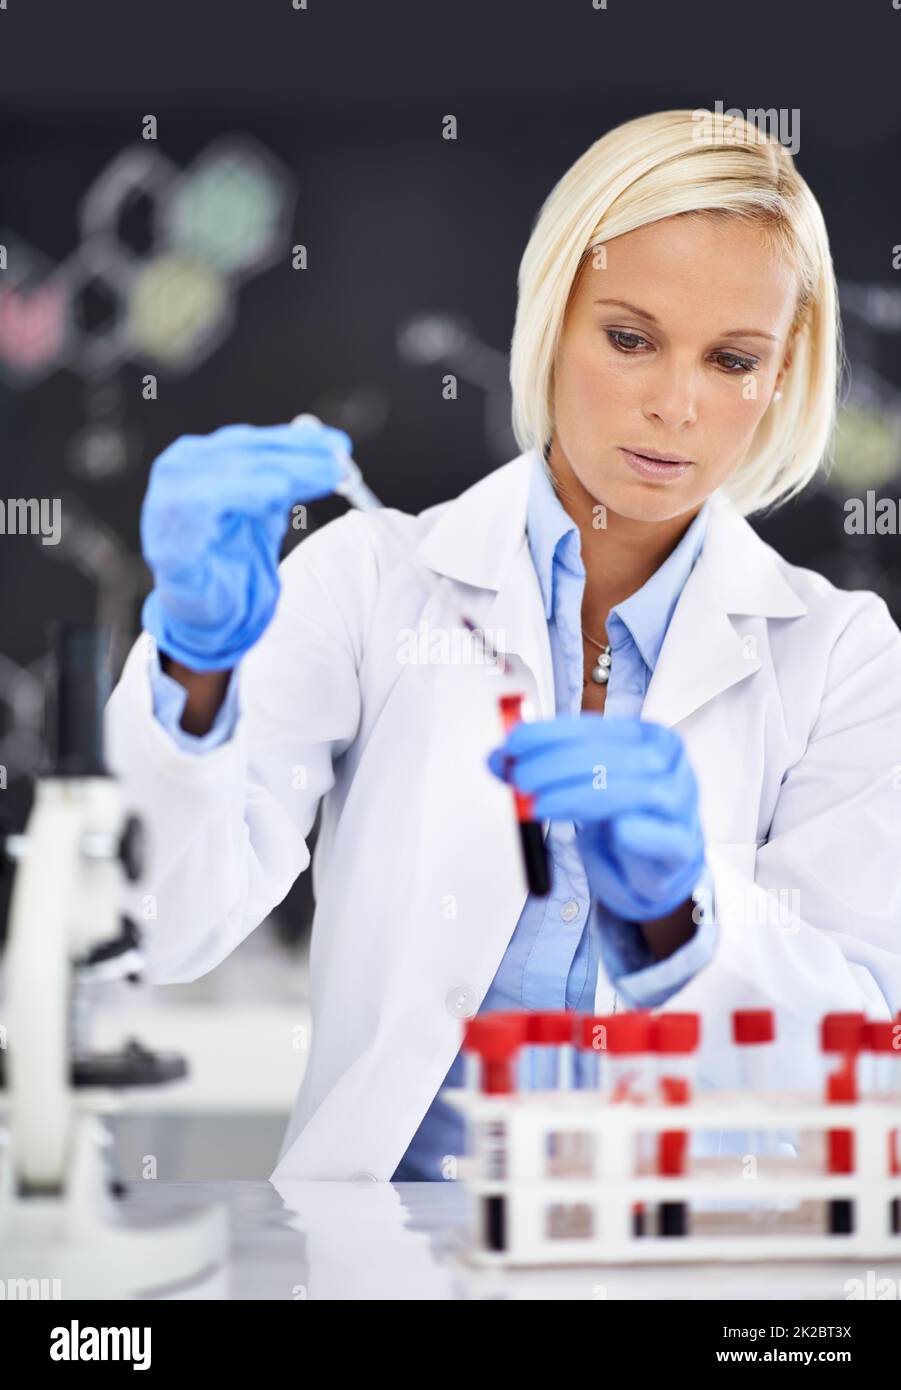 Advancing medical research. Shot of a female scientist at work. Stock Photo